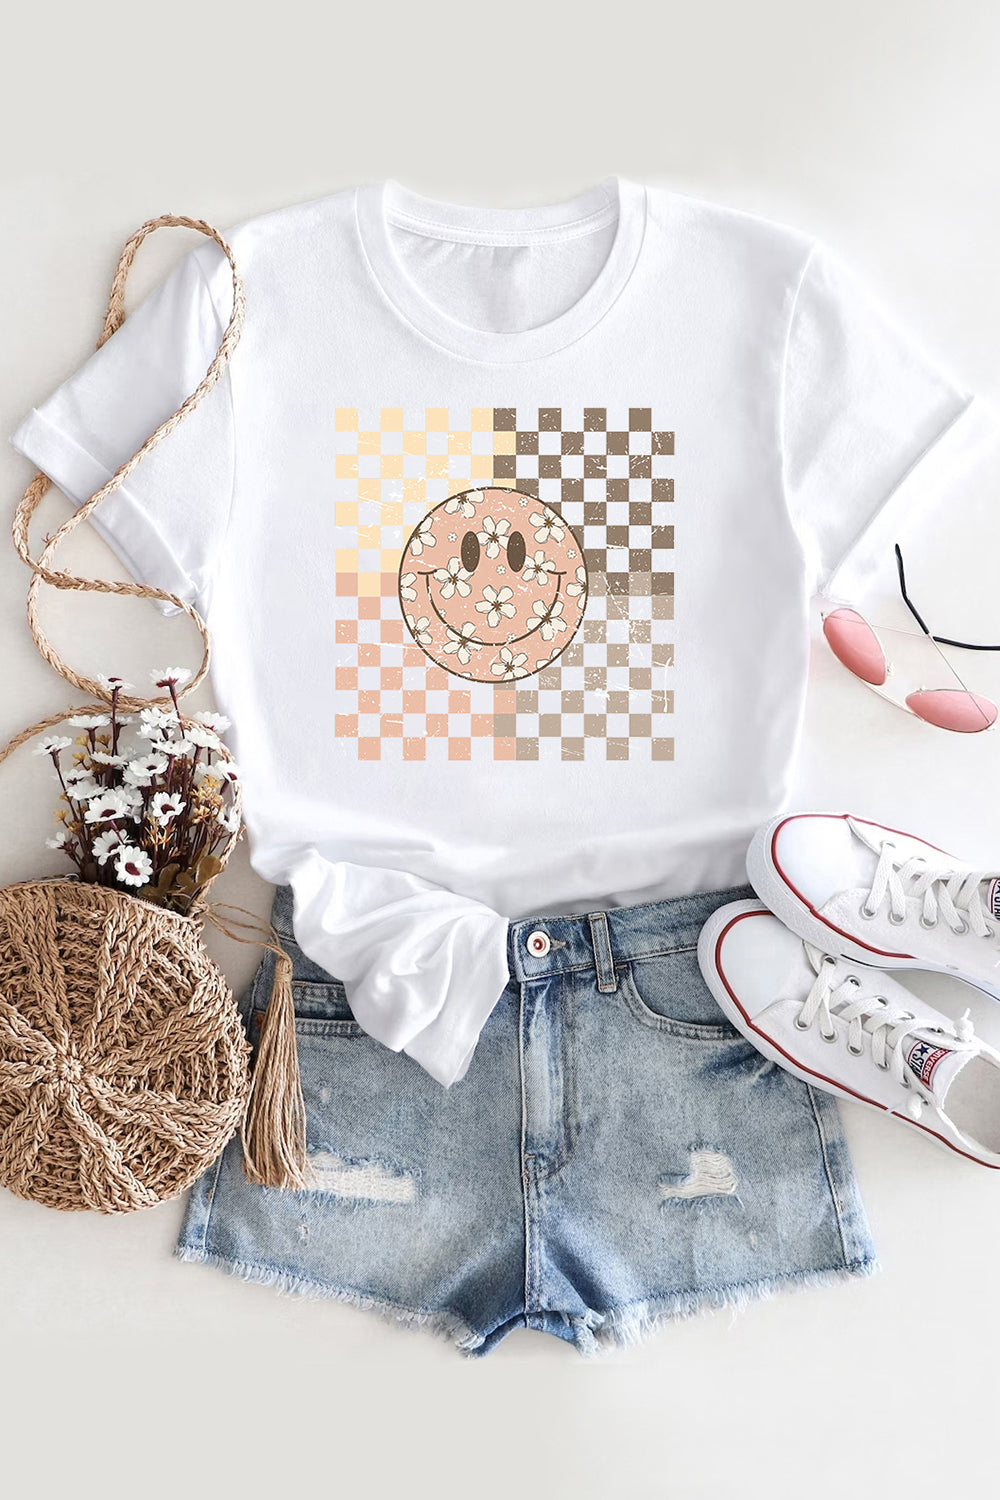 Floral Smiley Face Checkerboard Pattern T-shirt For Women